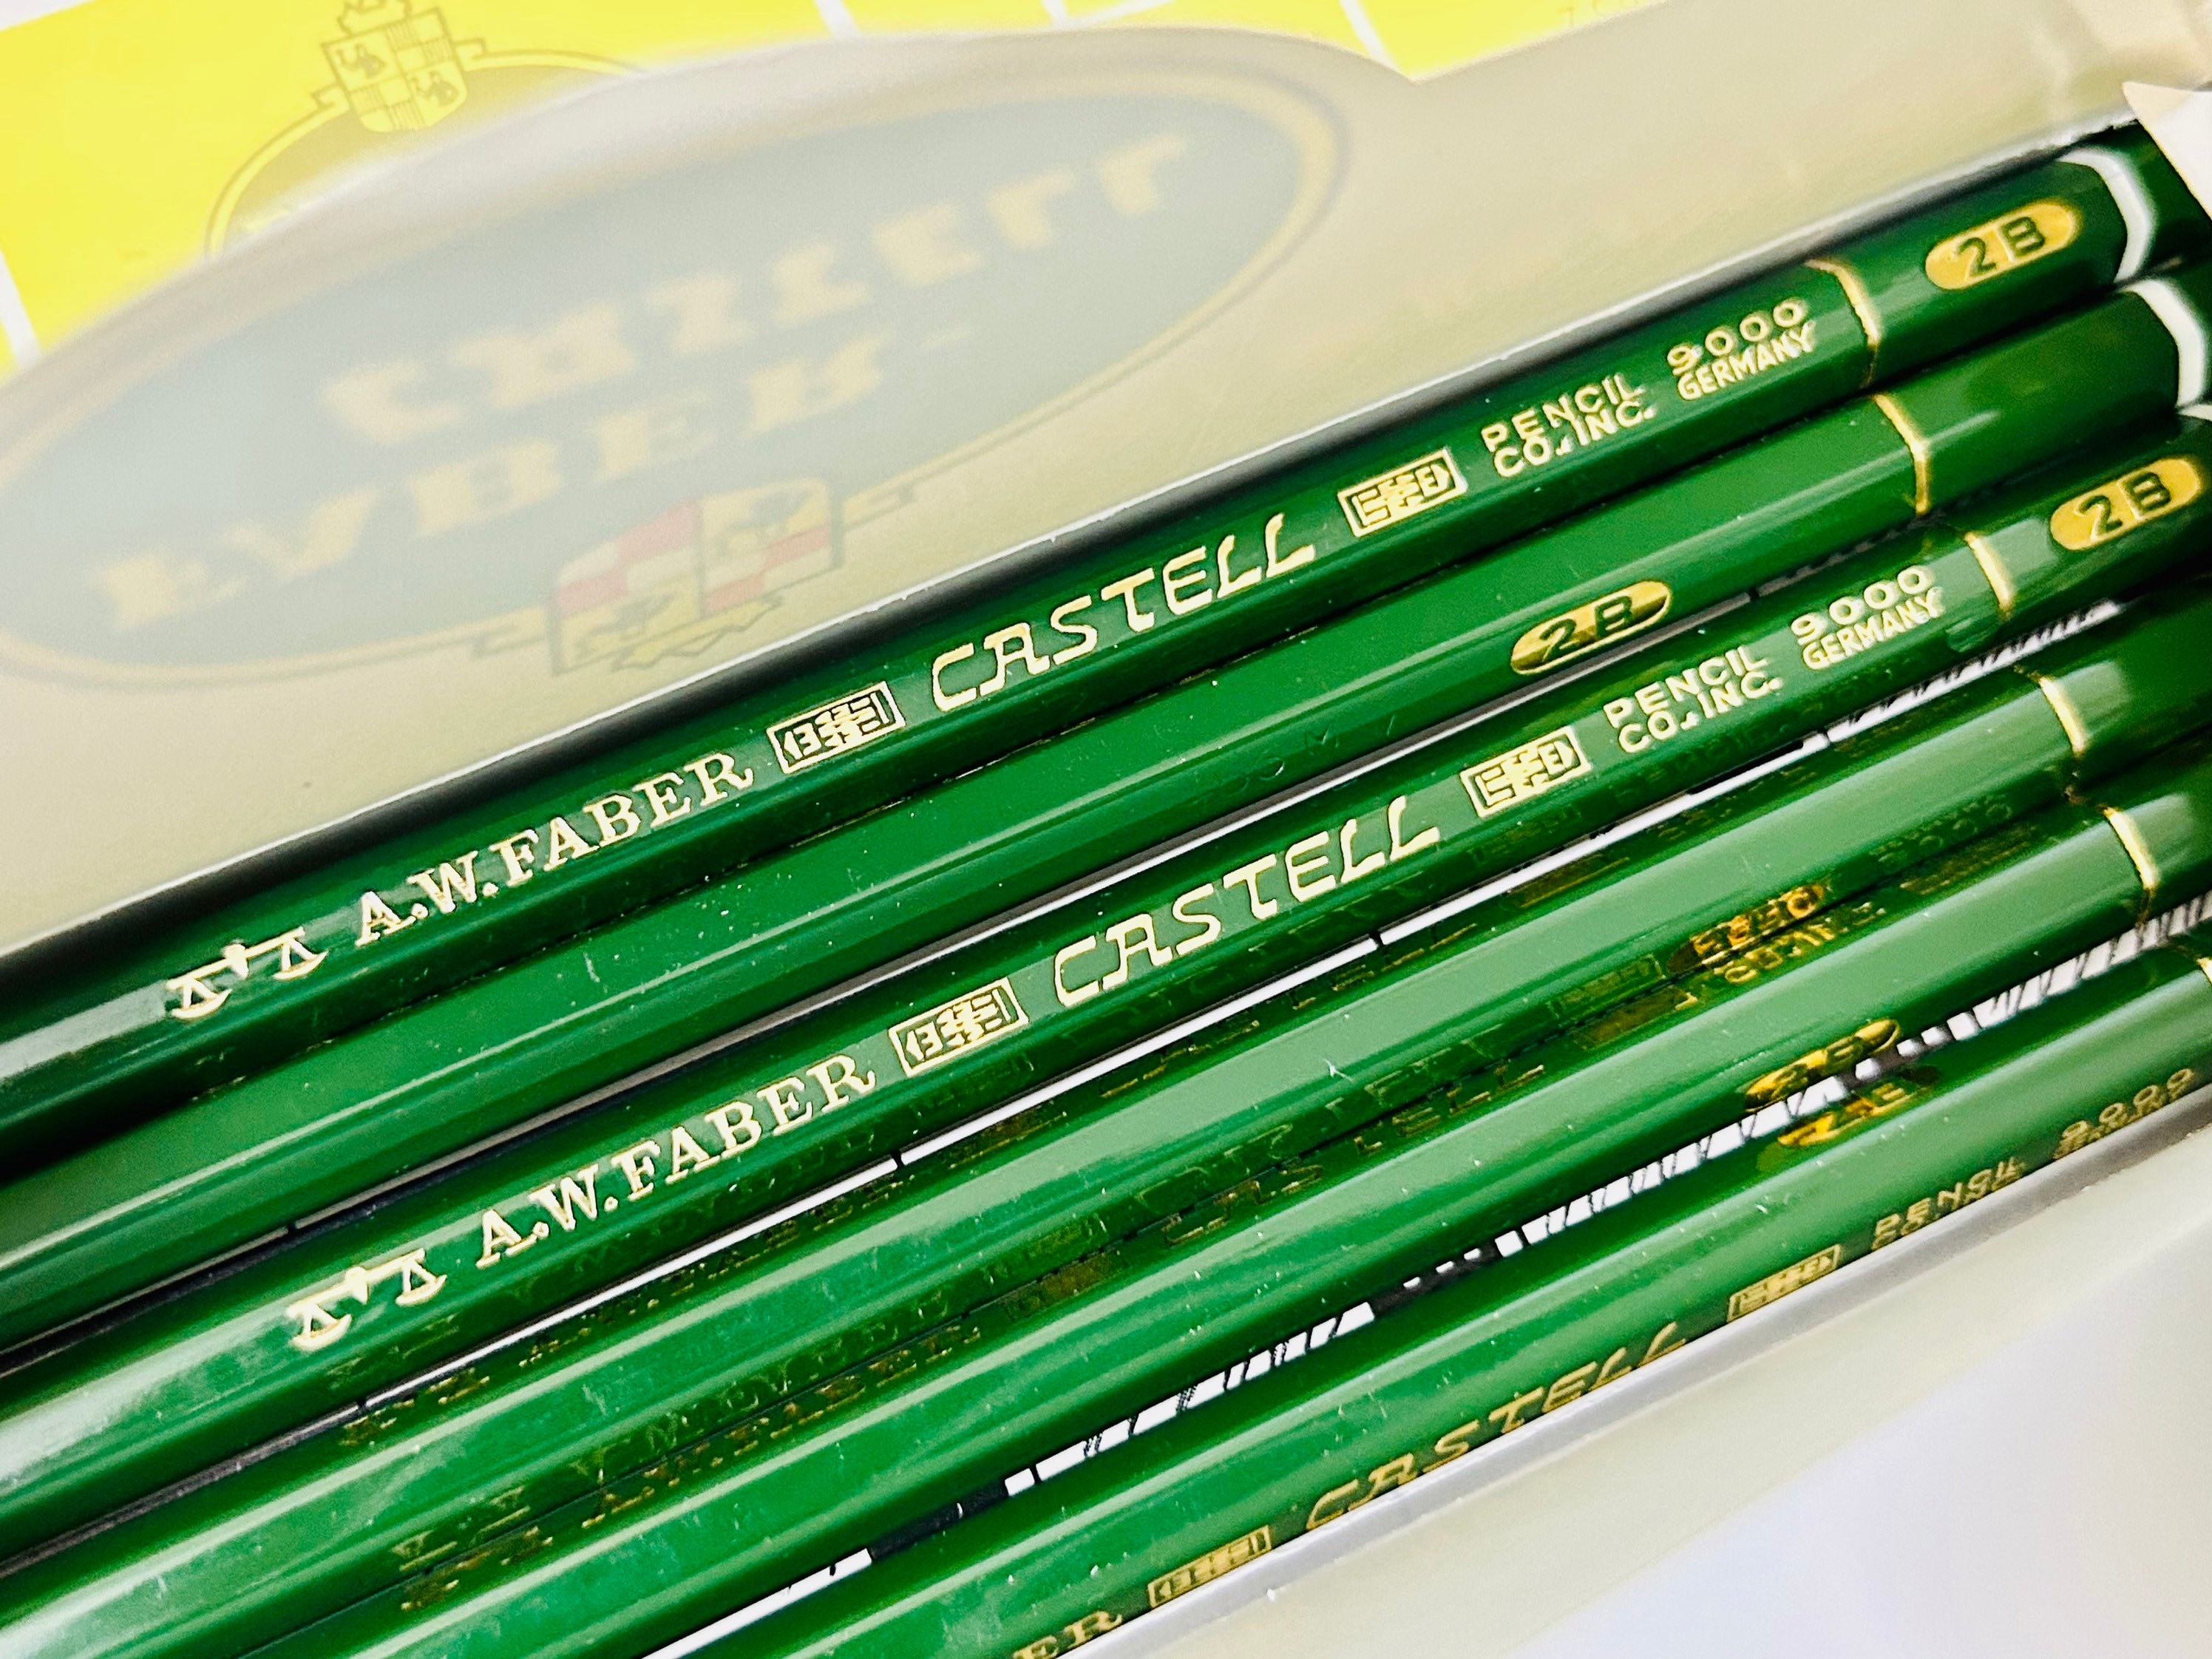 Vintage Faber-castell Lettering Set, Made in Japan, Green Case That Snaps,  Not Sure If Complete, Appears to Be Unused, 1960s 